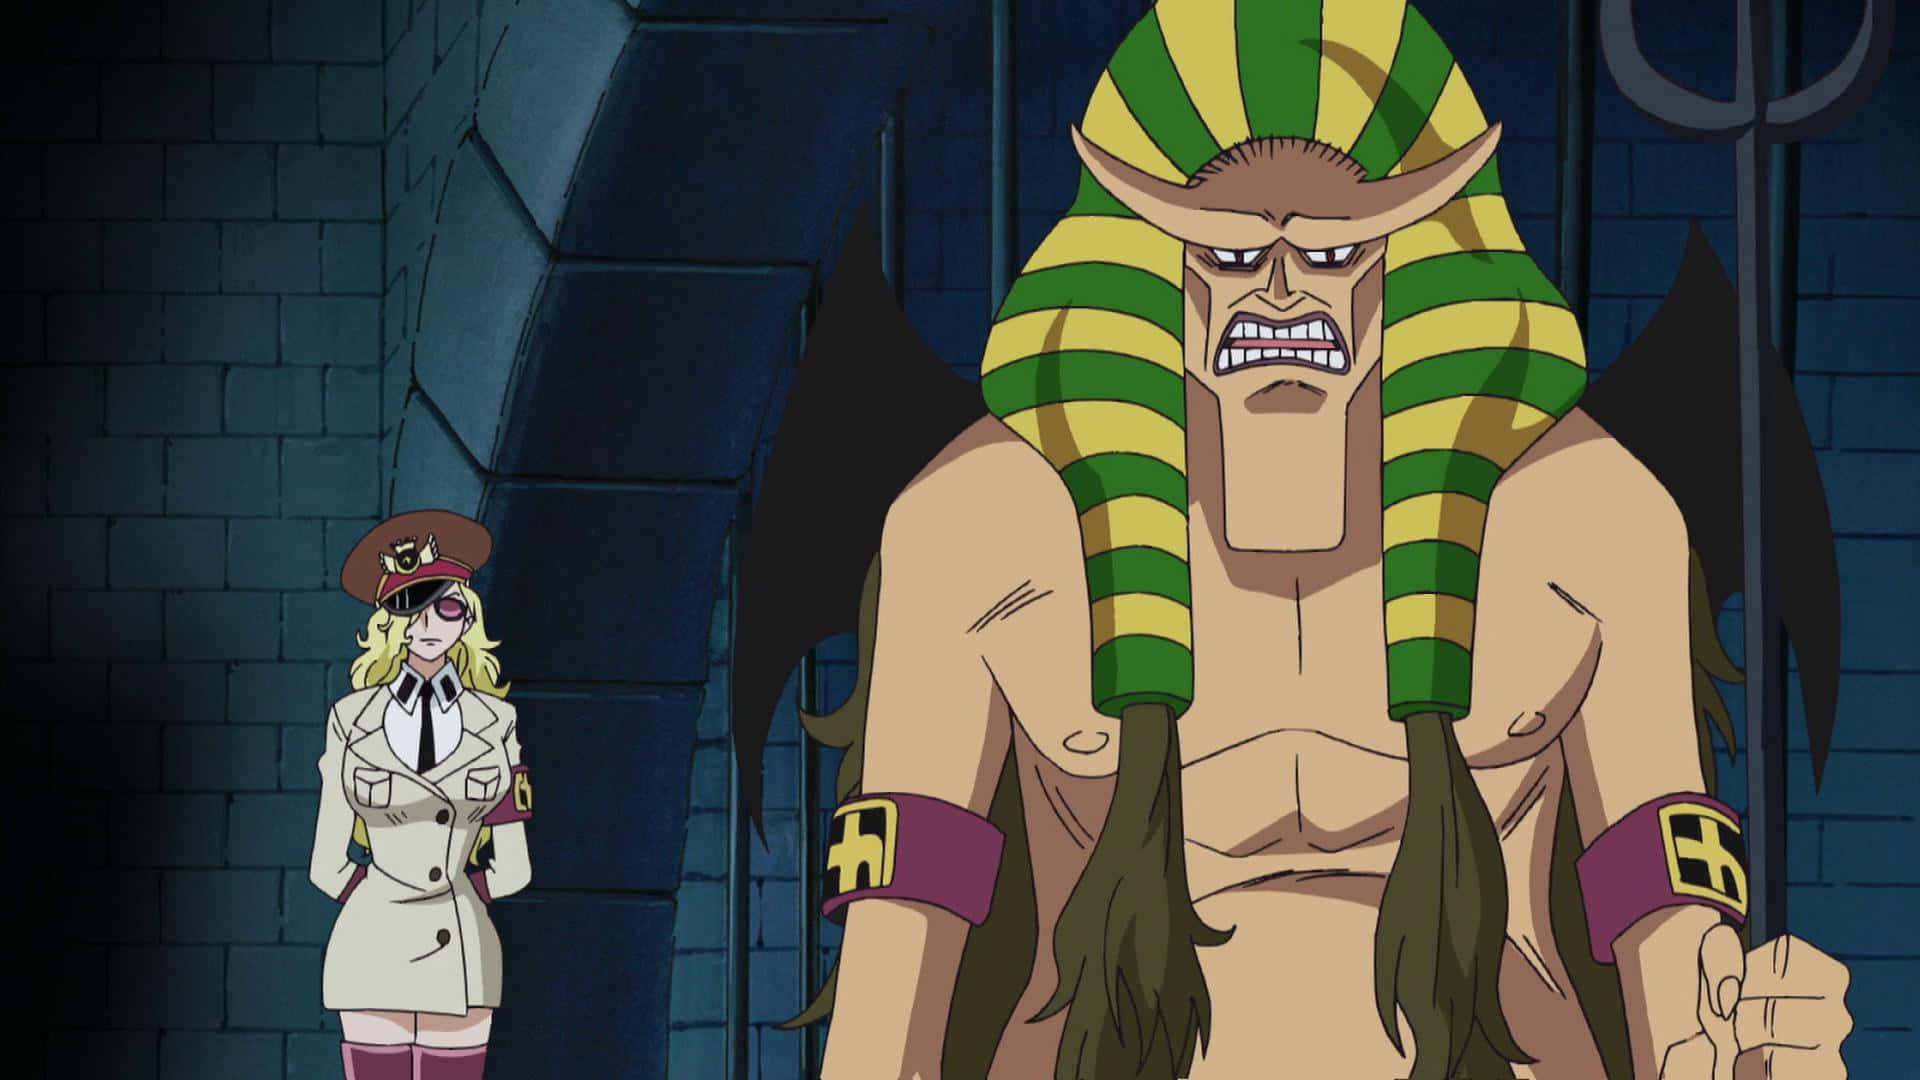 Entering Impel Down, the Legendary Marine Fortress Wallpaper